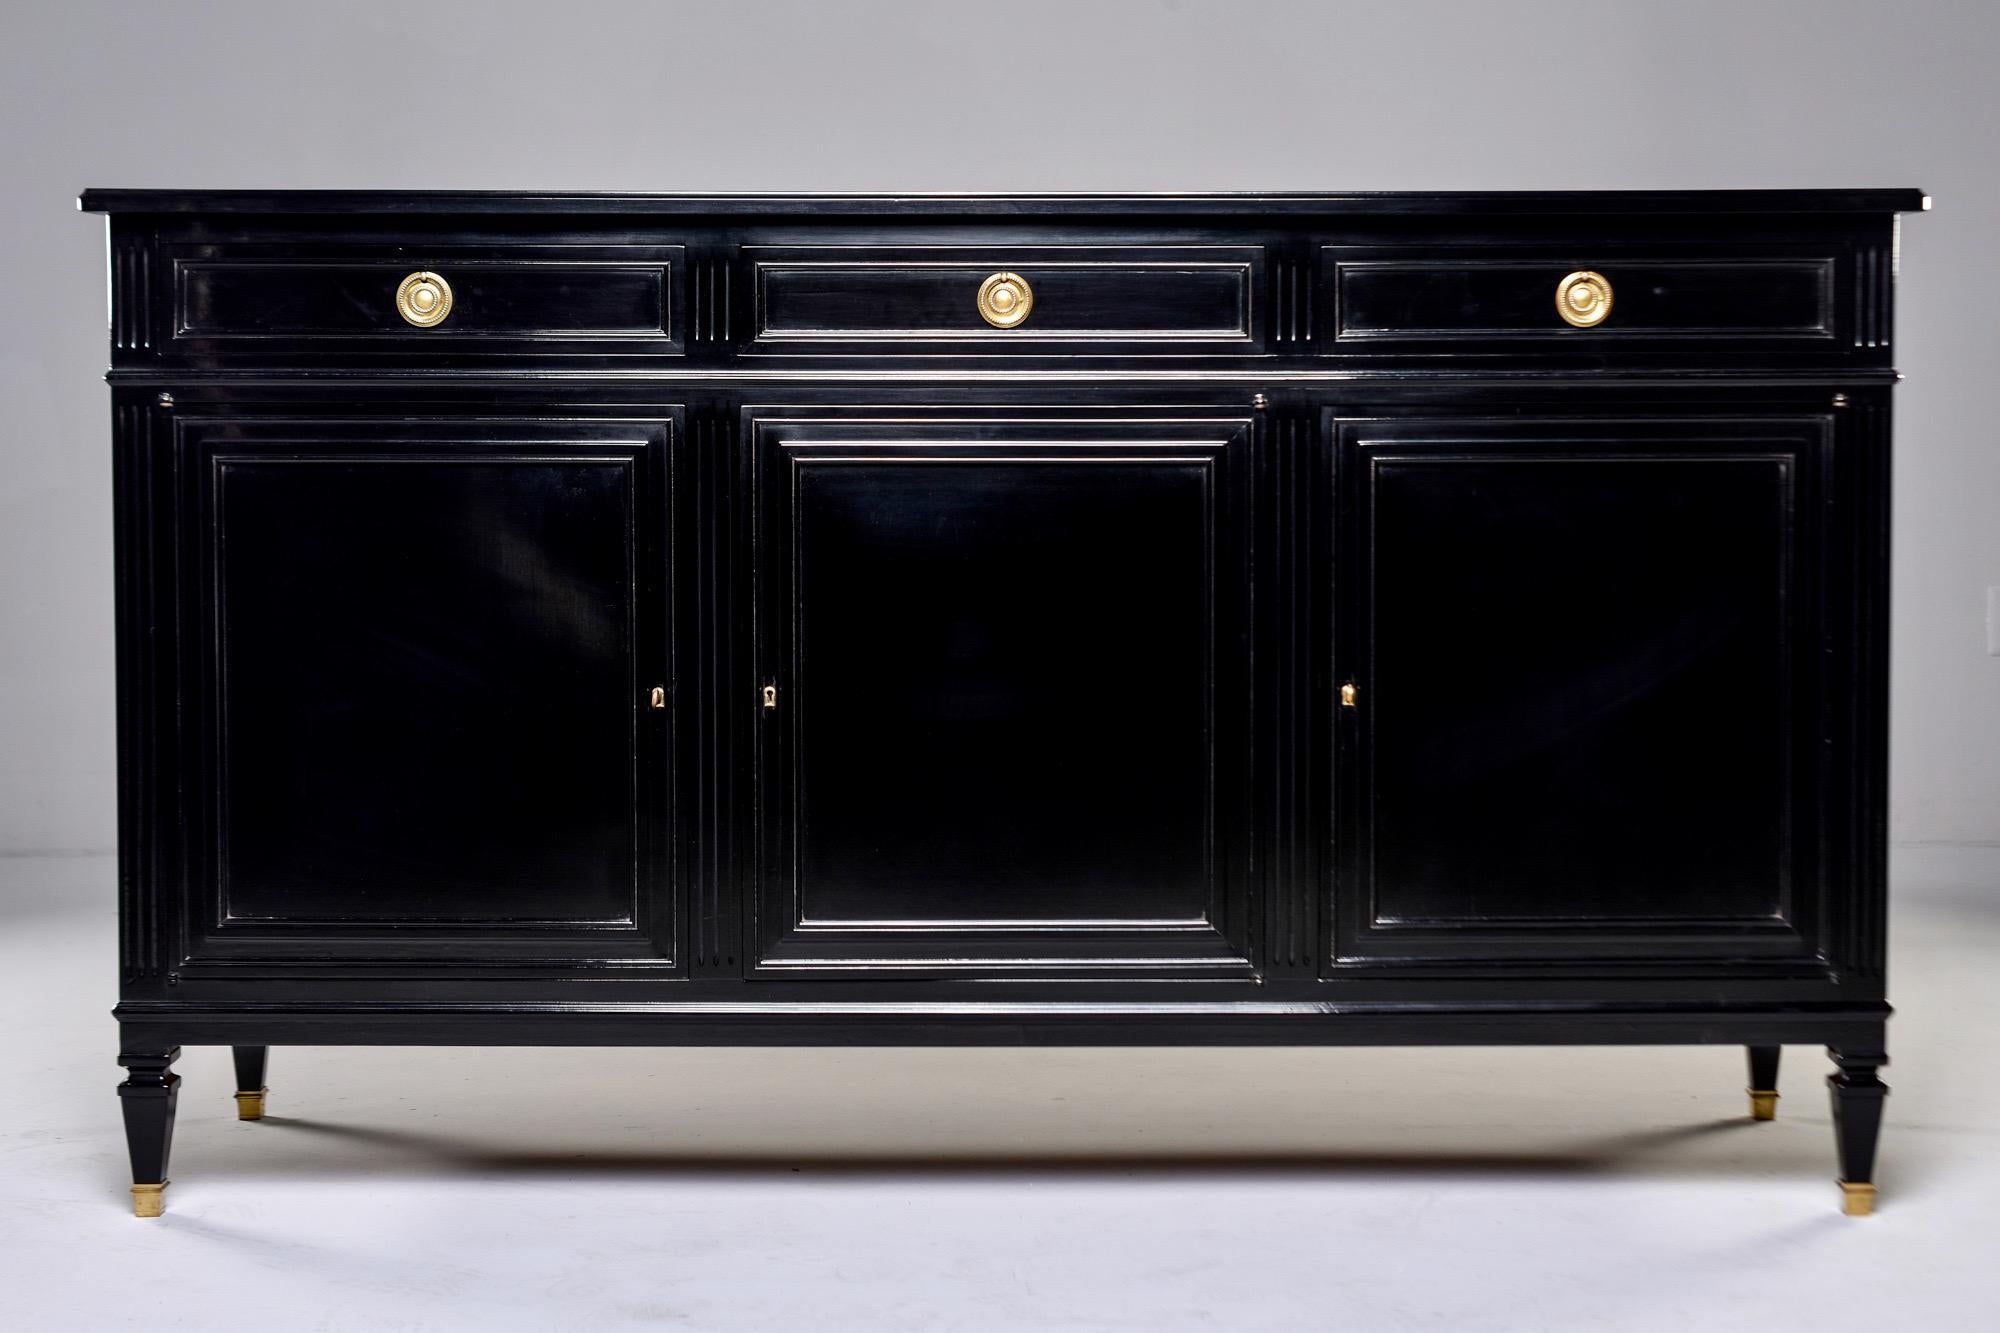 Found in England, this circa 1950s mahogany commode or buffet has a new ebonized finish. At the top are three narrow drawers with dovetail construction and three locking hinged door cabinets below. Each cabinet has one adjustable shelf. Brass